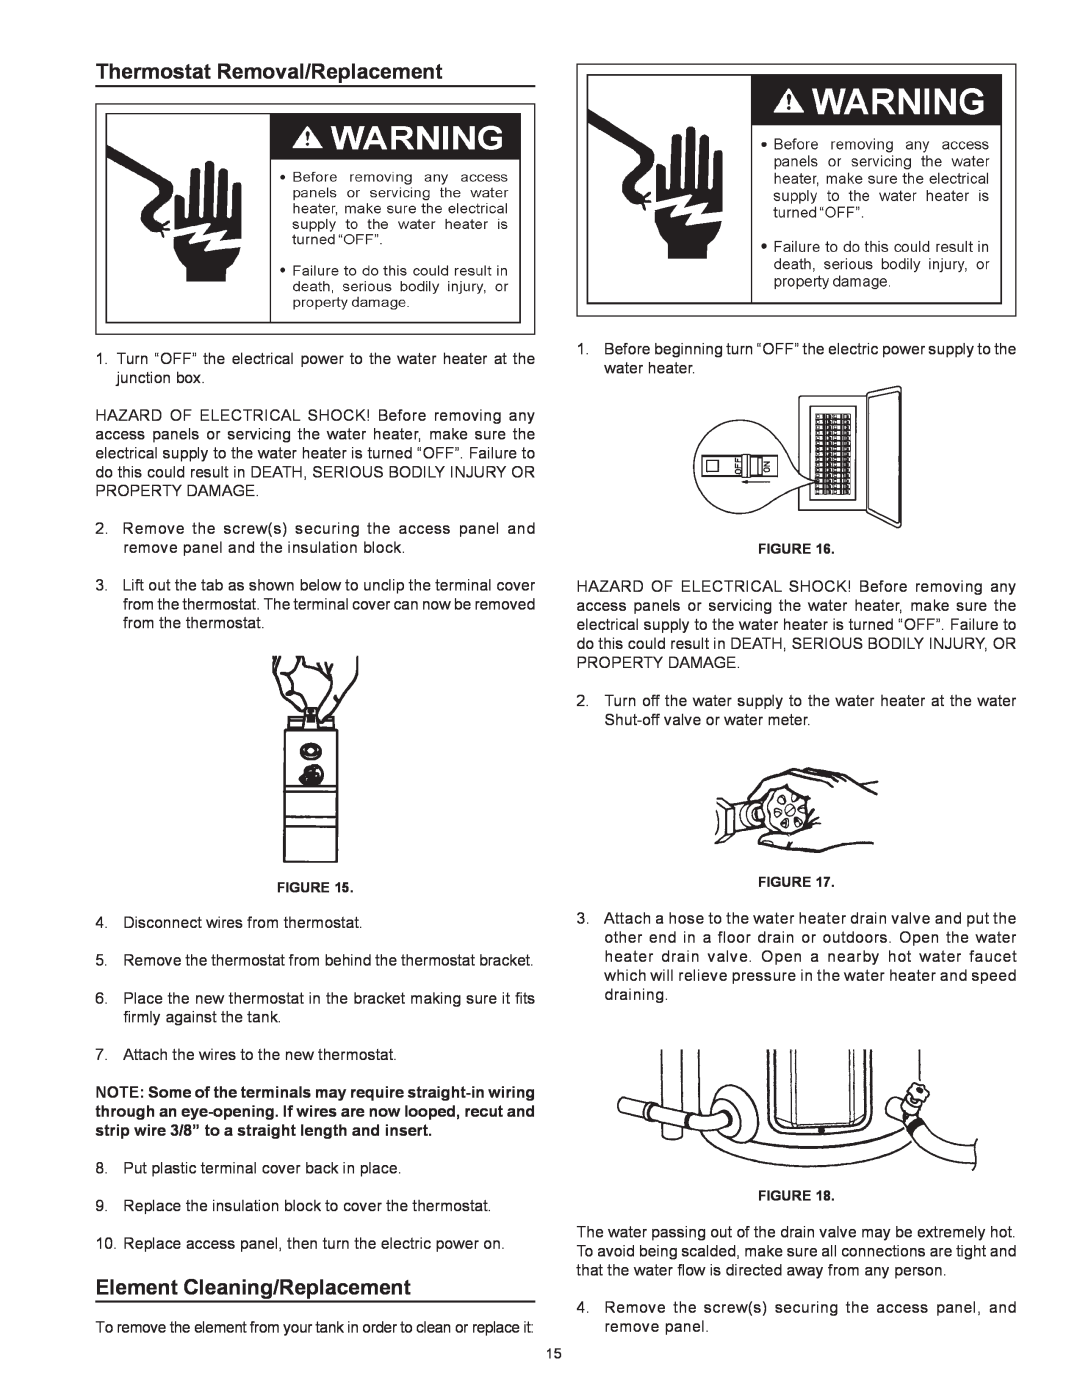 Kenmore 153.31604 owner manual Thermostat Removal/Replacement, Element Cleaning/Replacement 